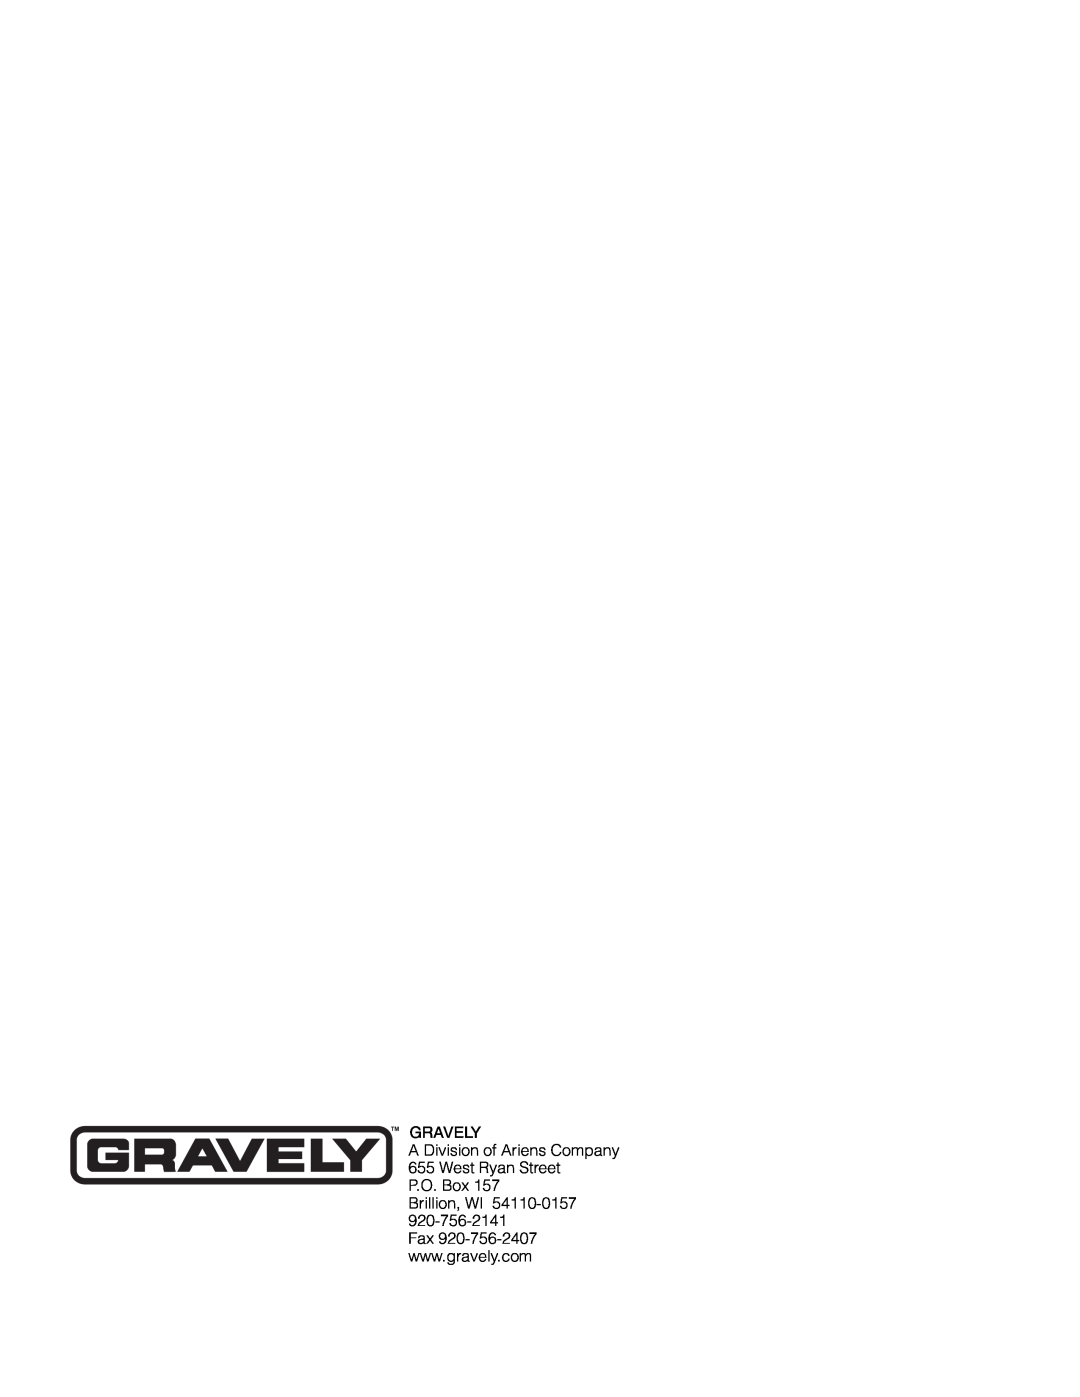 Gravely 890015* manual Gravely, A Division of Ariens Company 655 West Ryan Street, P.O. Box Brillion, WI 